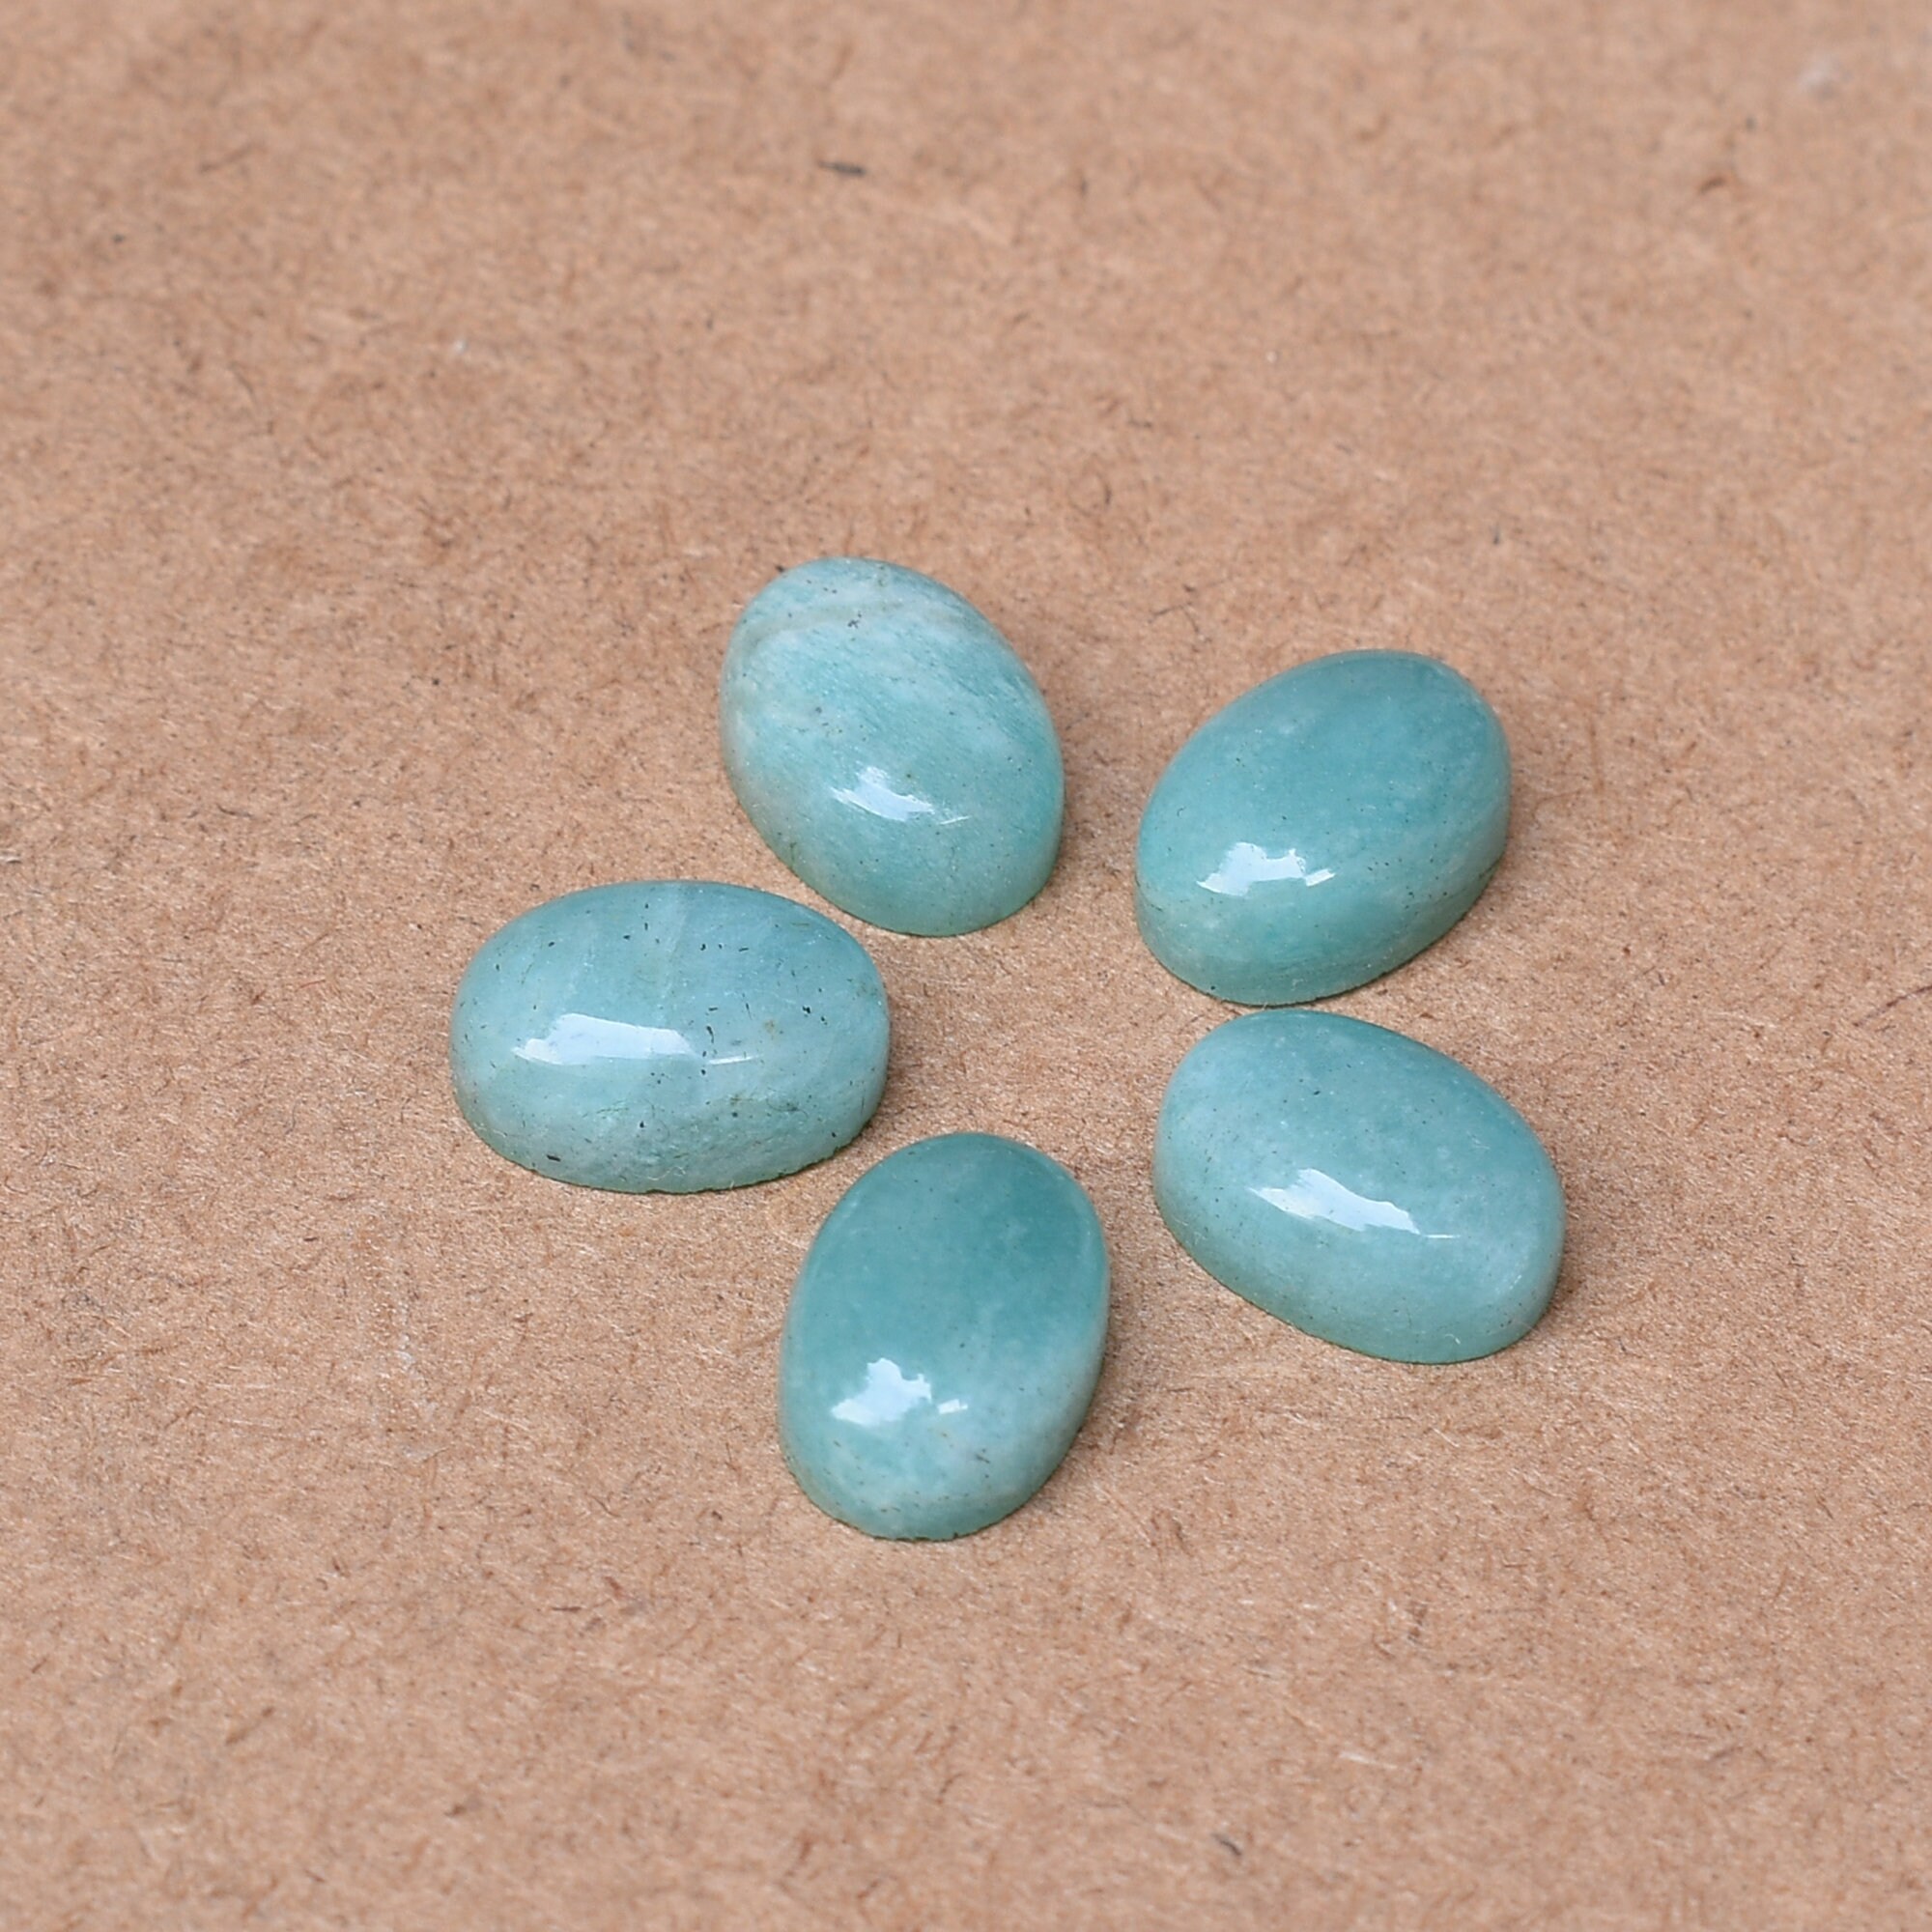 Natural Amazonite Oval Cabochon Flat Back Calibrated Size Loose Gemstone3x5,4x6,5x7,8x10,10x12,10x14MM All size available For Jewelry Making